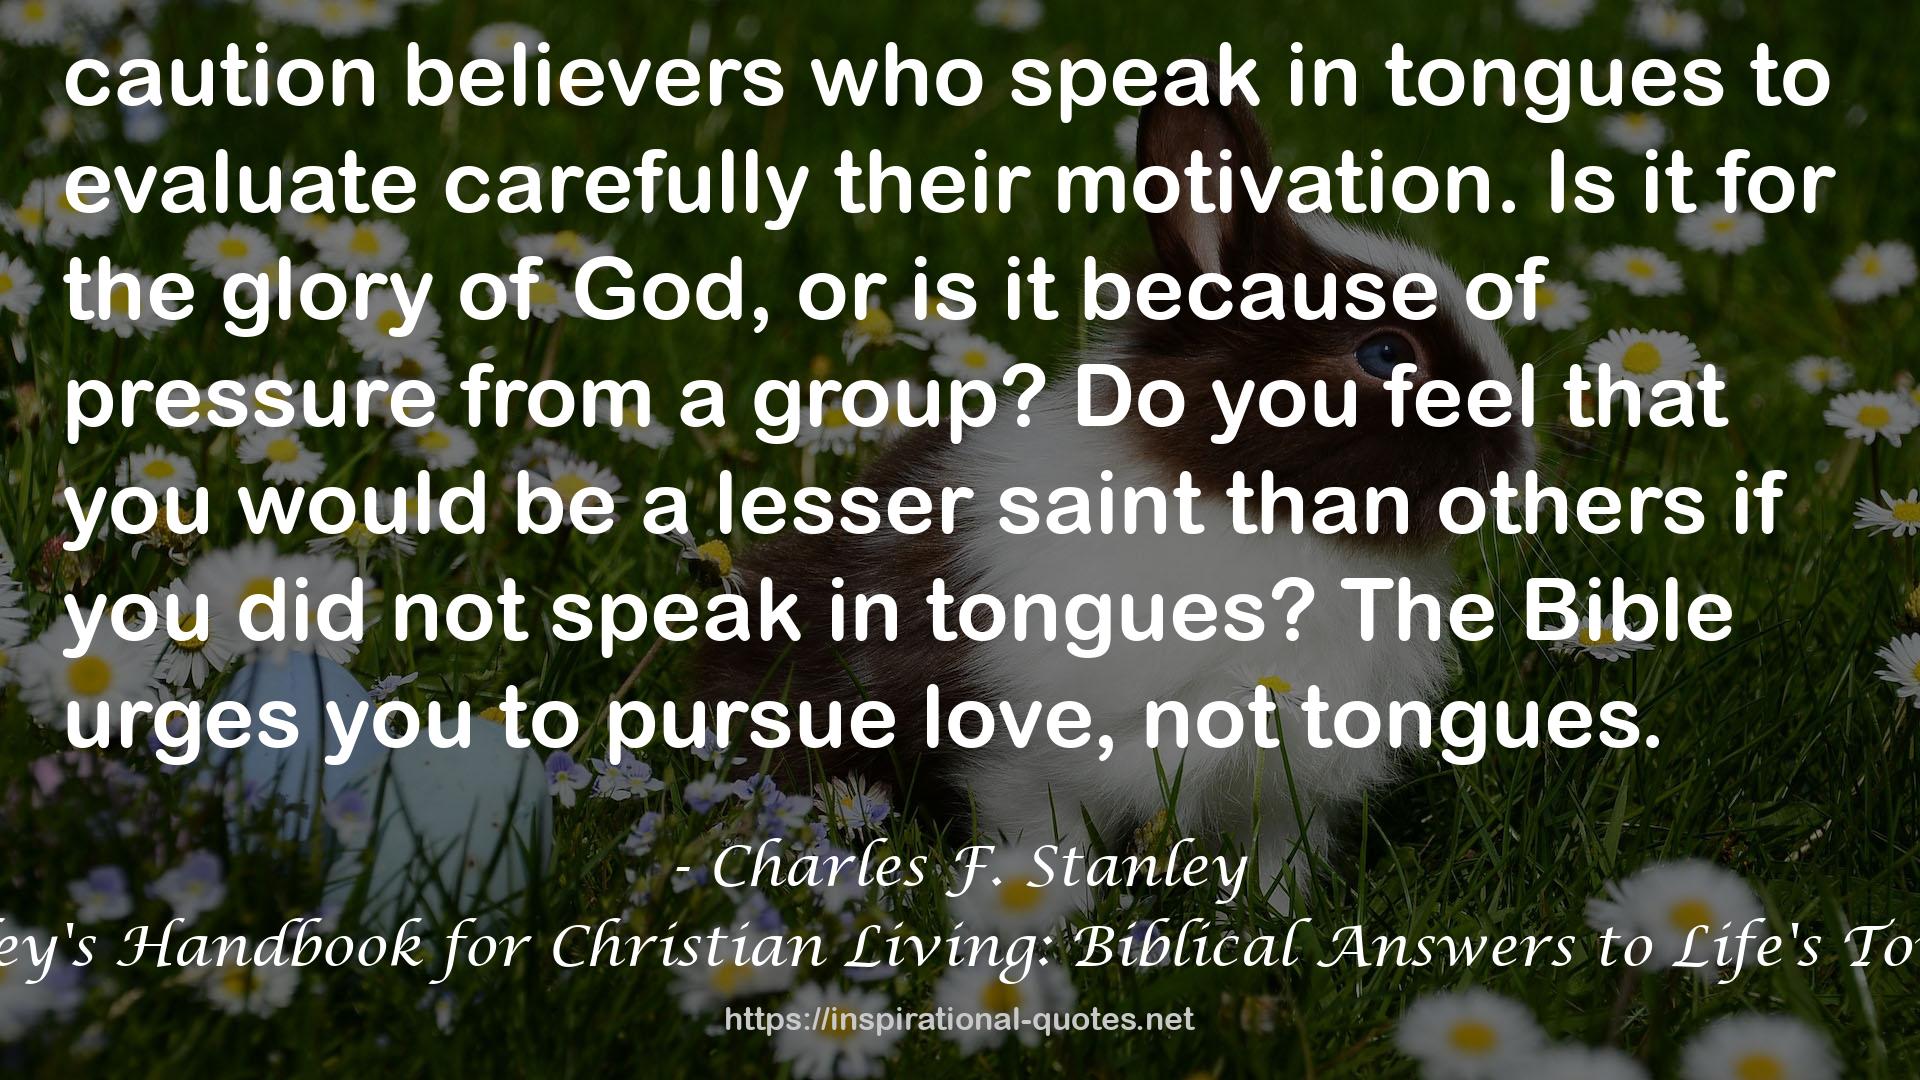 Charles Stanley's Handbook for Christian Living: Biblical Answers to Life's Tough Questions QUOTES